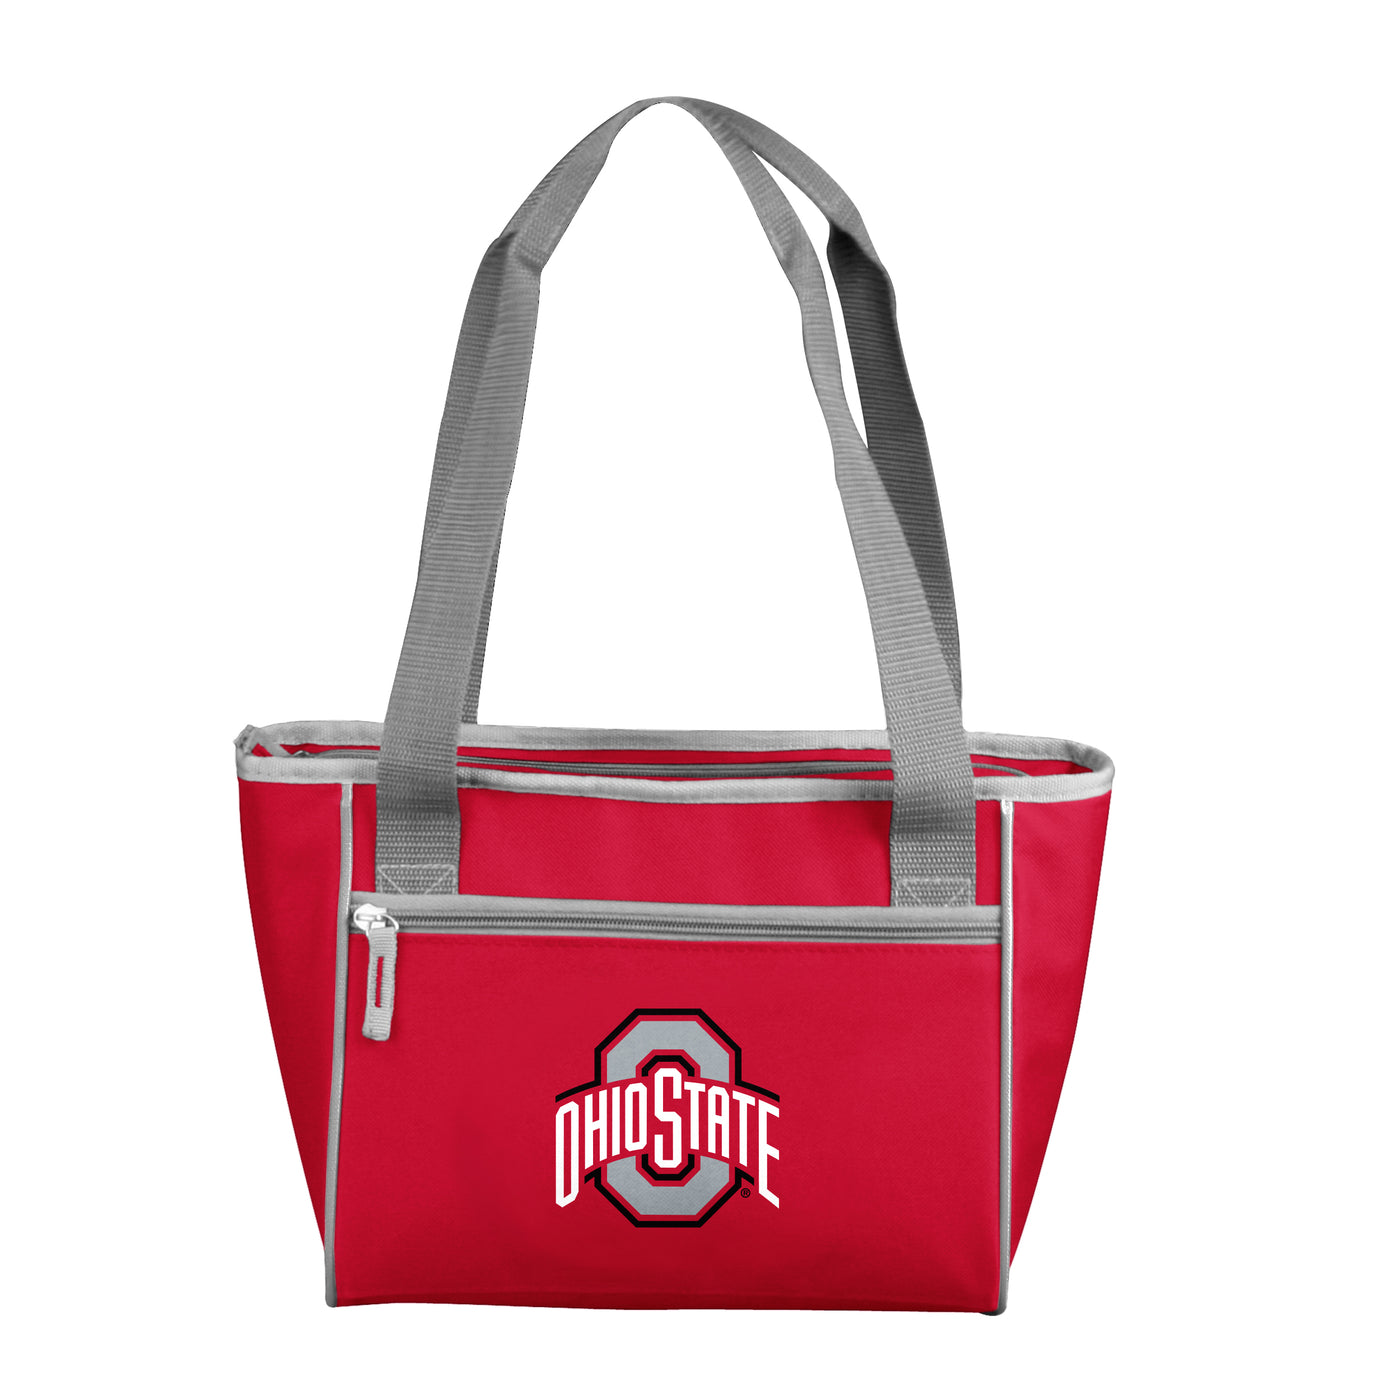 Ohio State 16 Can Cooler Tote